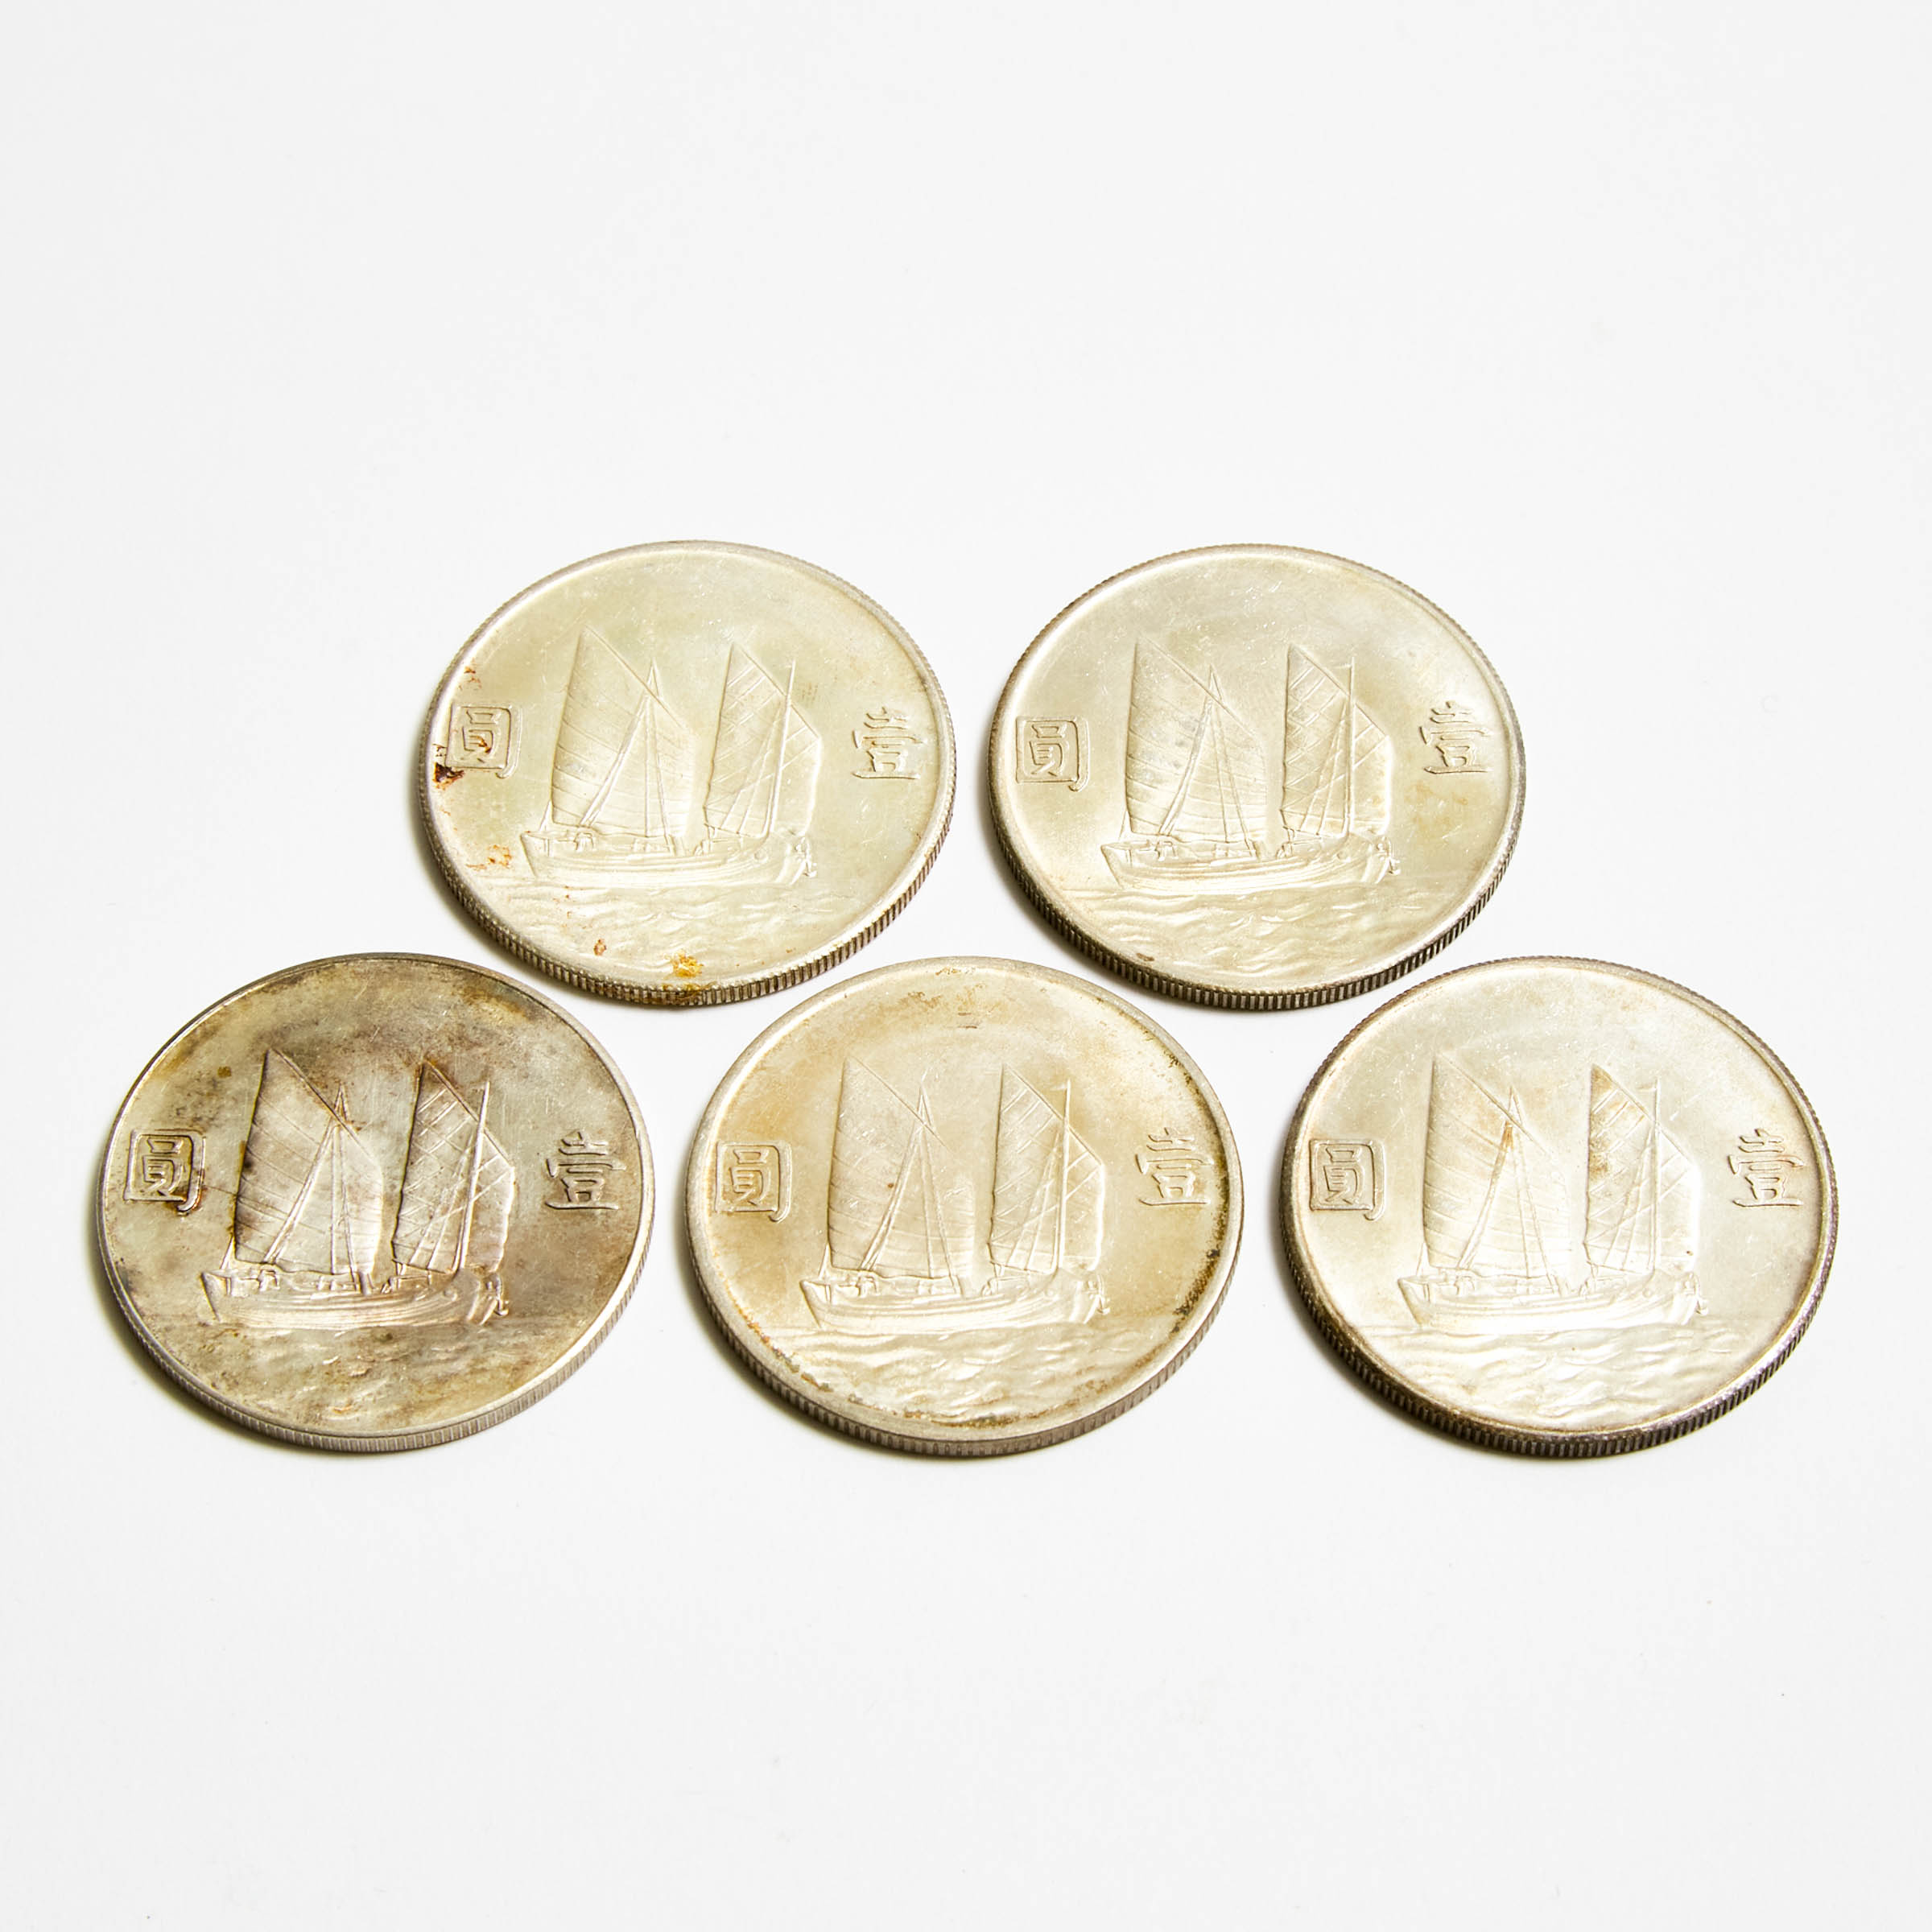 A Group of Five Chinese Silver 'Junk' Dollar Coins, AU, 1934